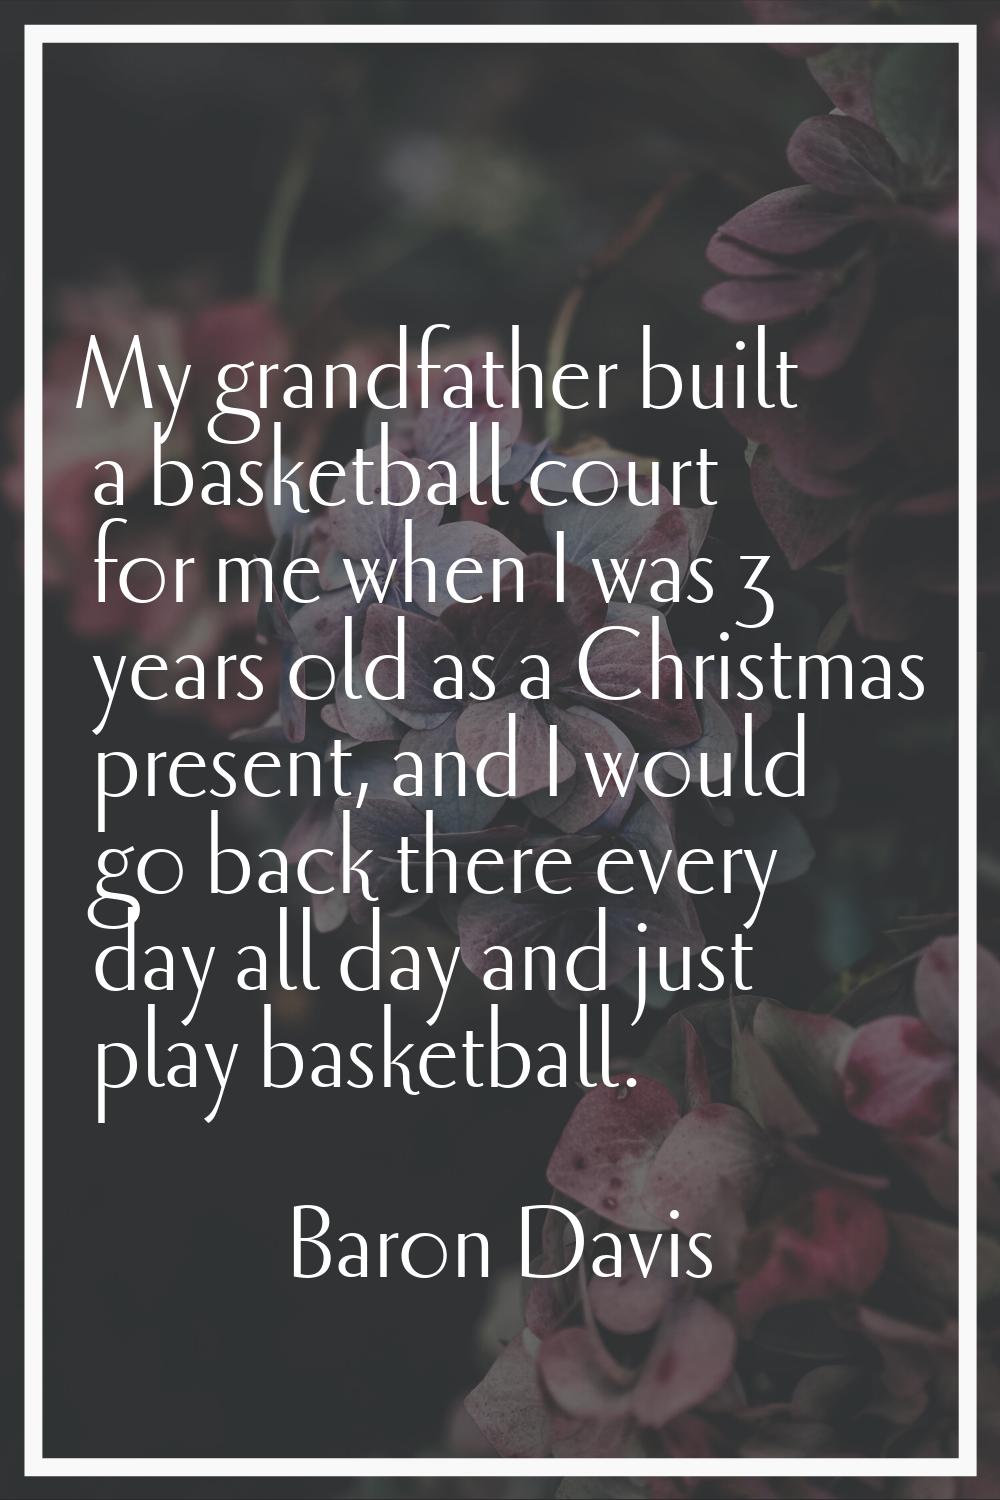 My grandfather built a basketball court for me when I was 3 years old as a Christmas present, and I